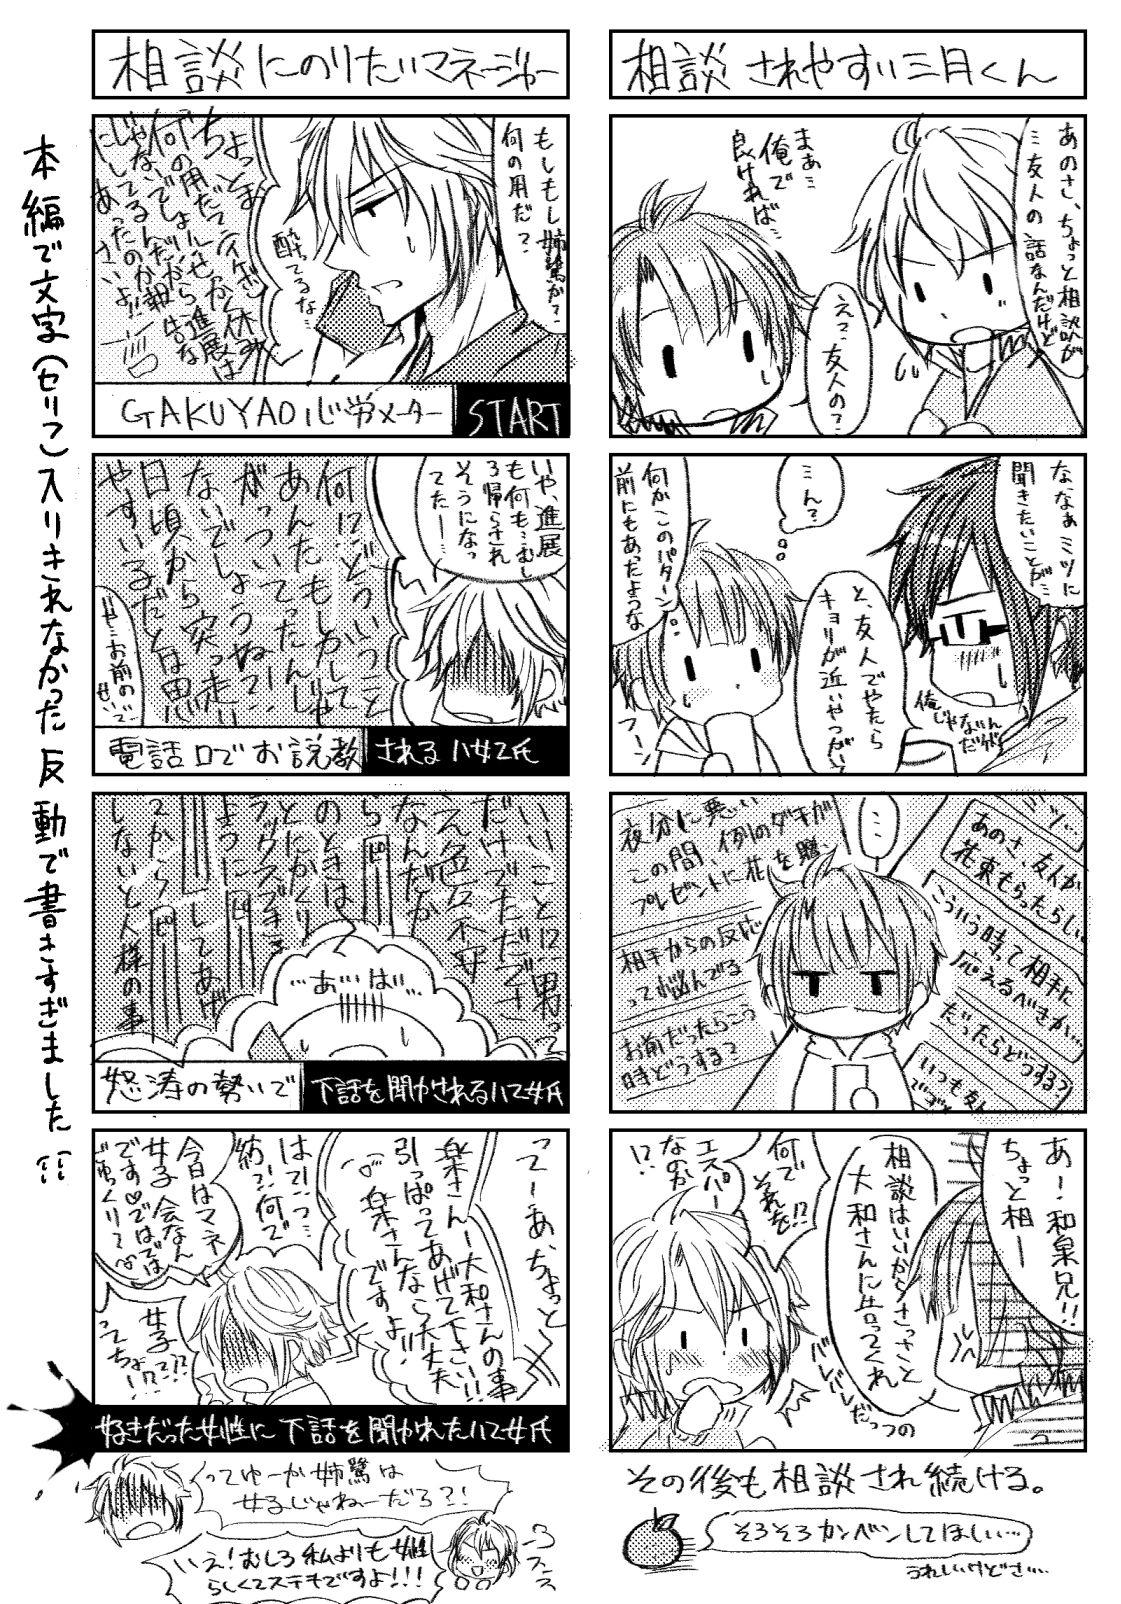 Str8 TIME IS HONEY - Idolish7 Party - Page 21